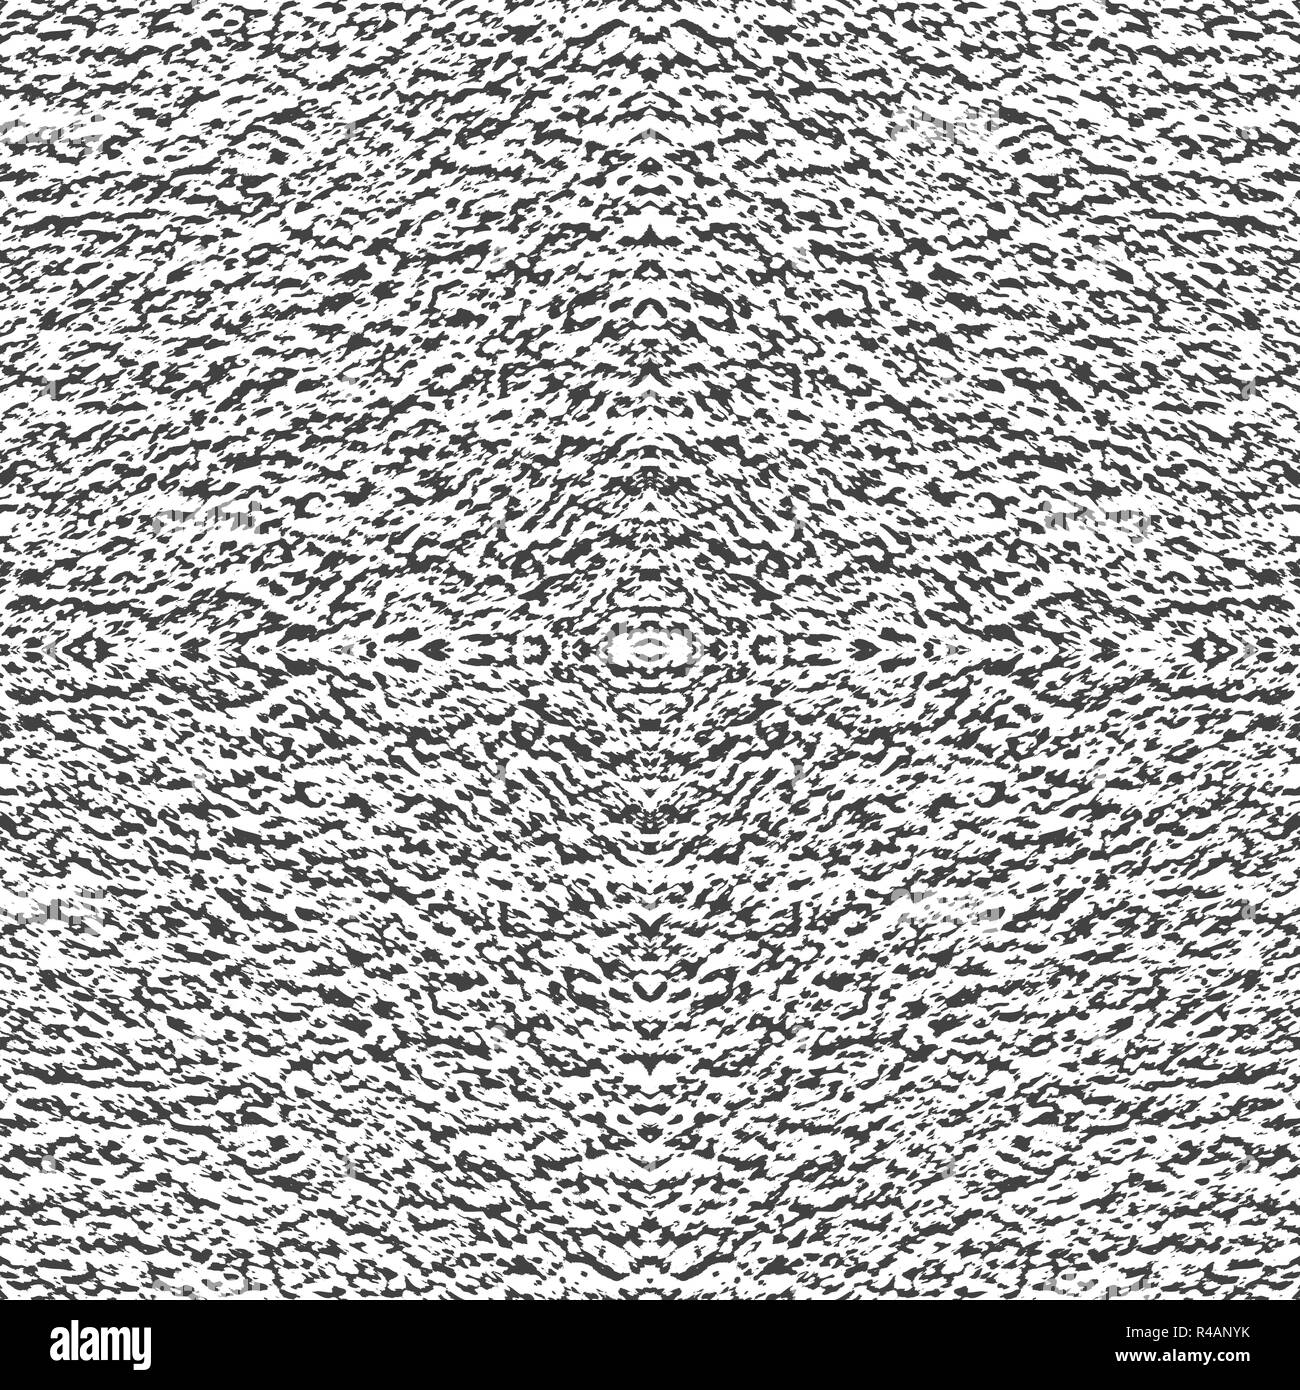 Shagreen texture Black and White Stock Photos & Images - Alamy